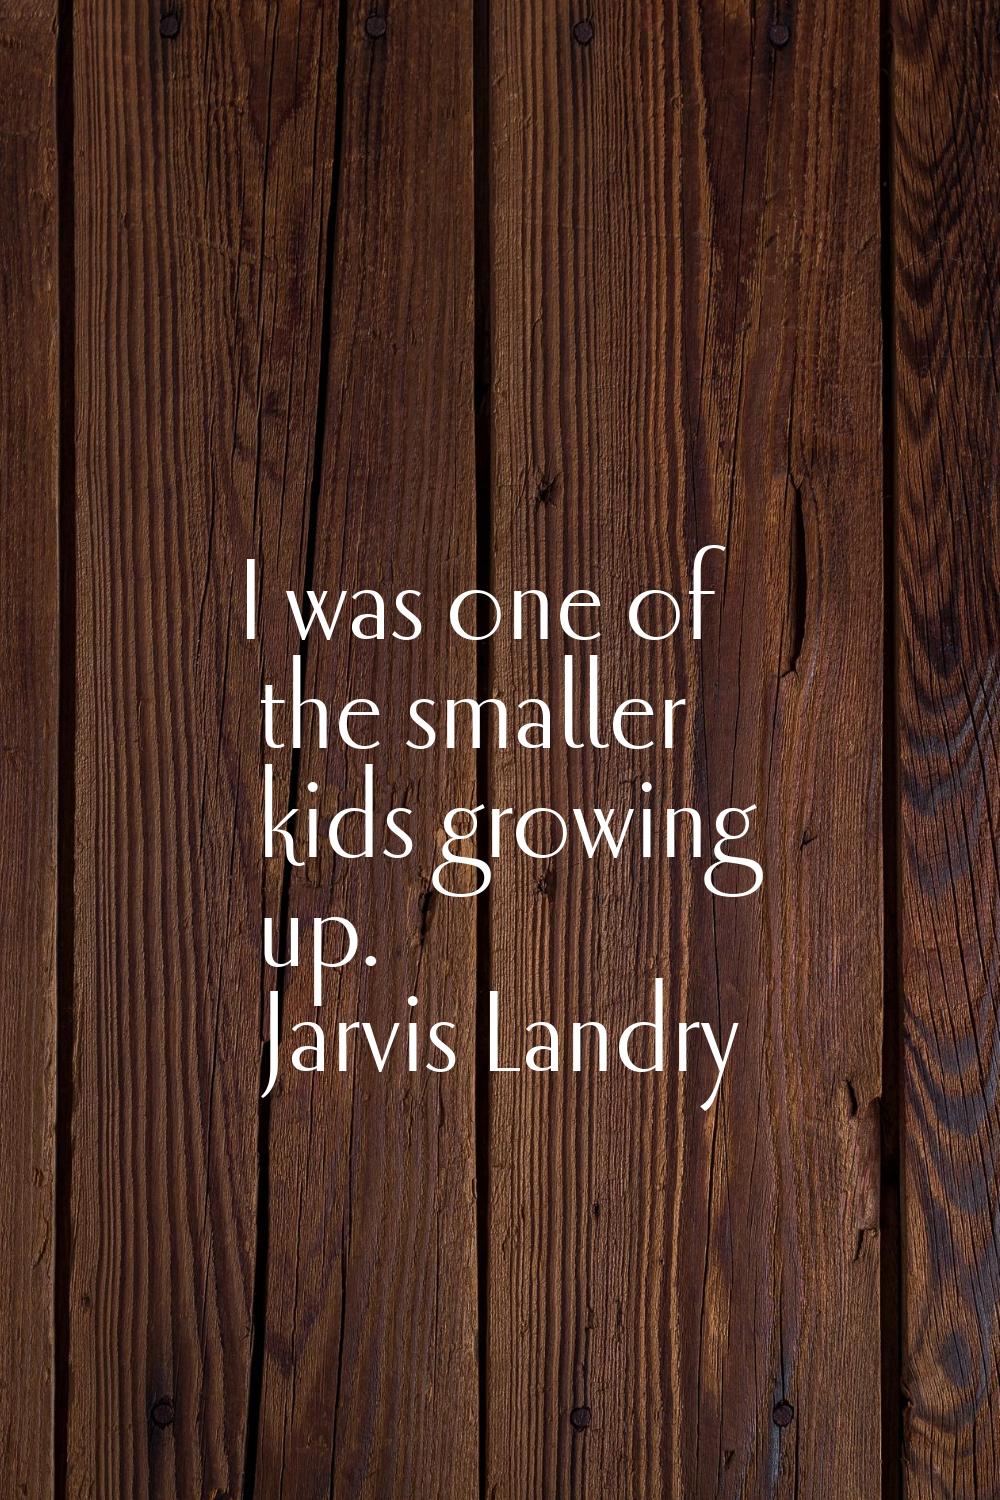 I was one of the smaller kids growing up.